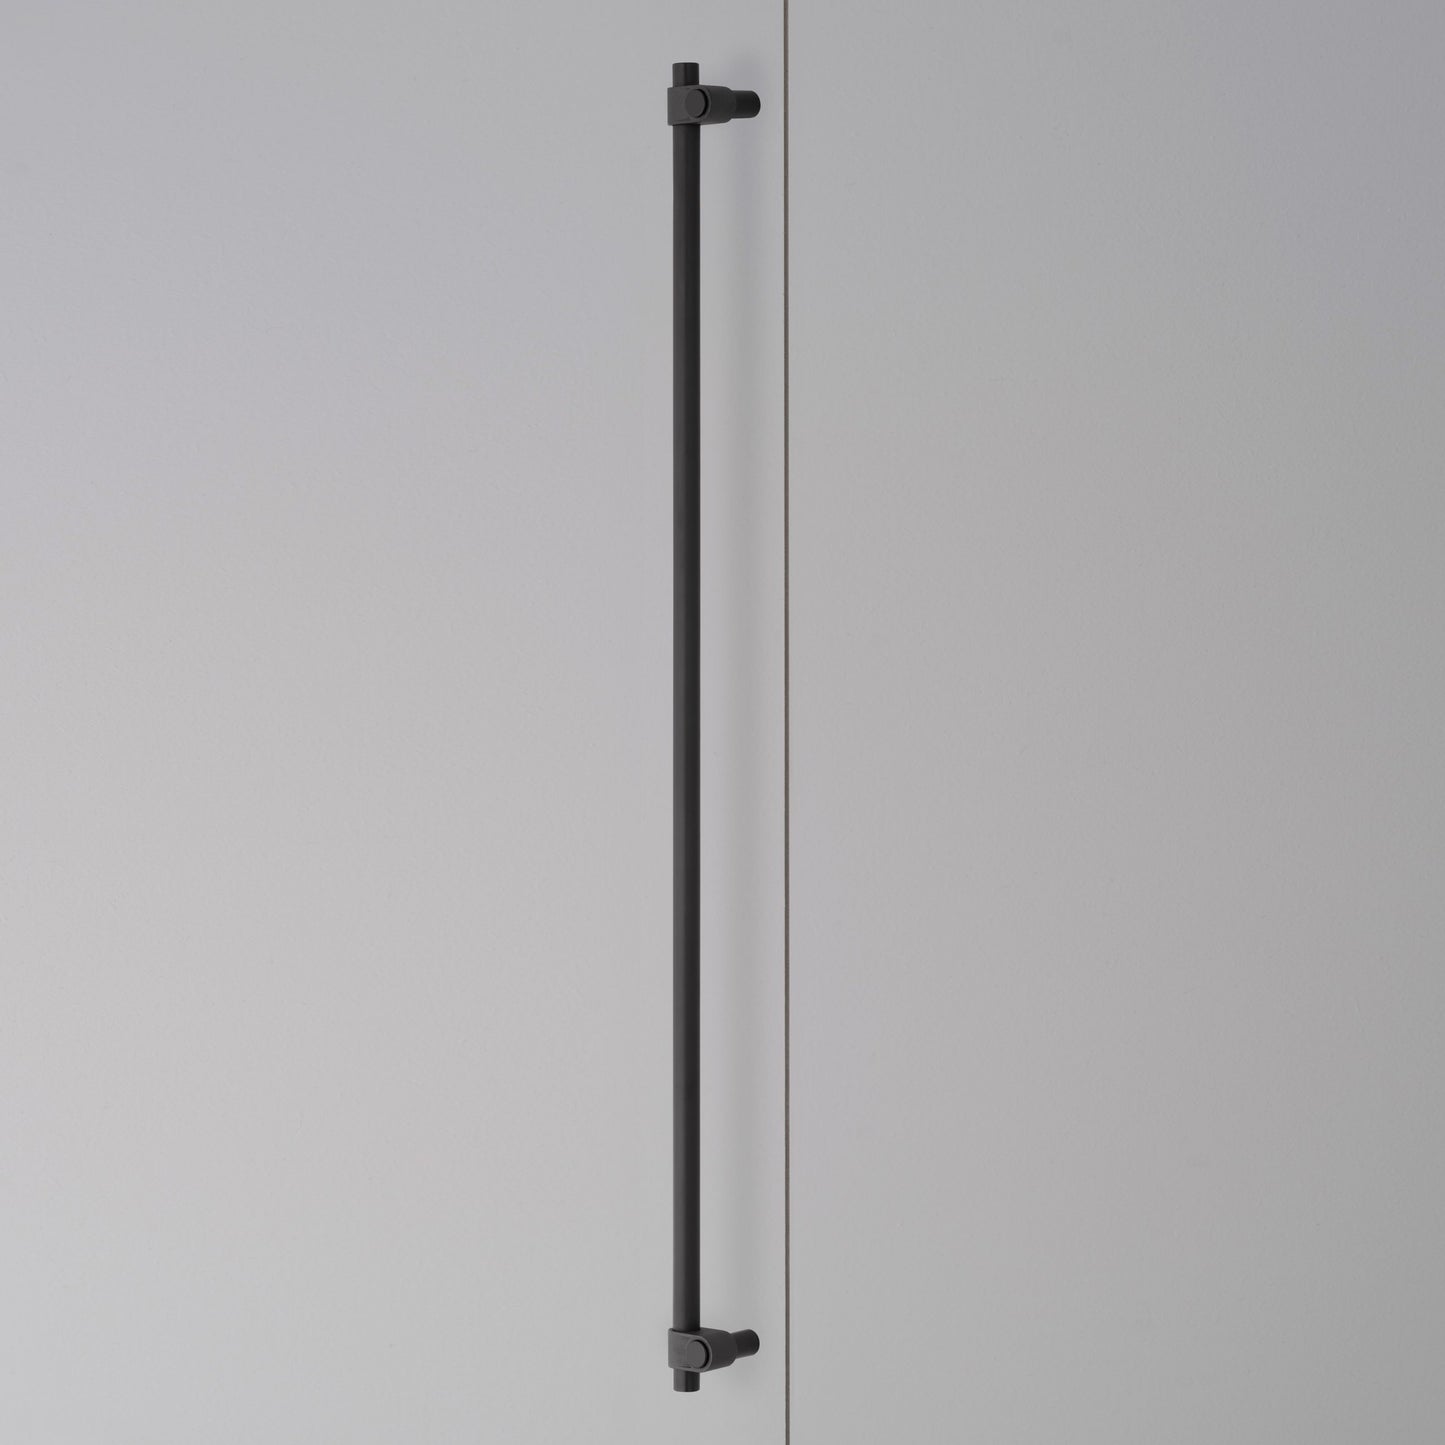 BUSTER + PUNCH | CLOSET BARS - CAST - $171.00-$209.00